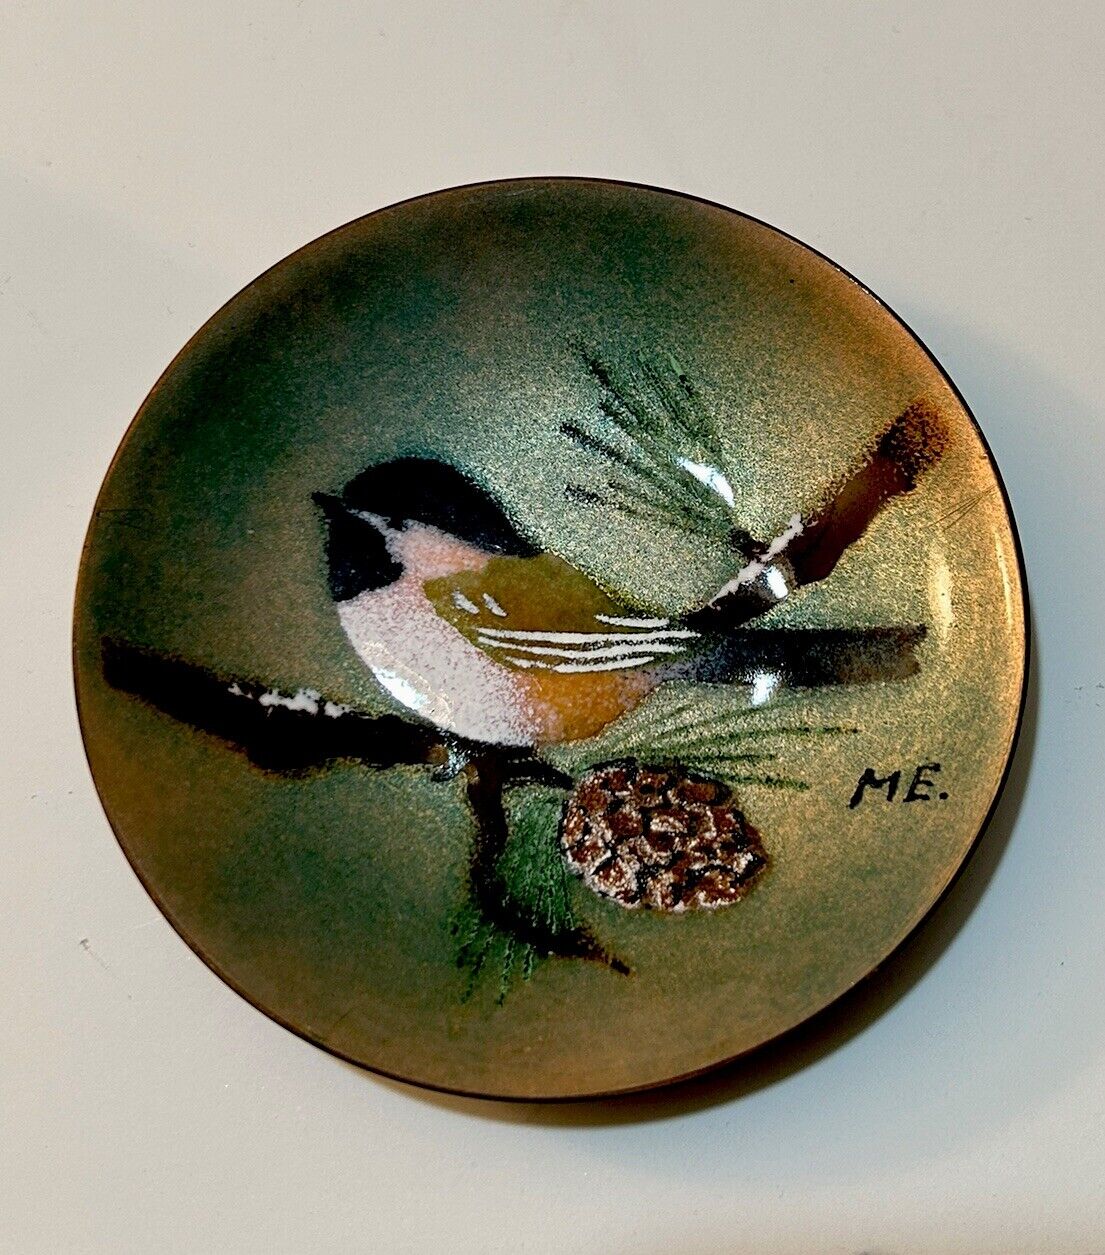 Bovano of Cheshire Ct. Handcrafted Enamel on Copper Plate VTG MCM Chicadee Bird